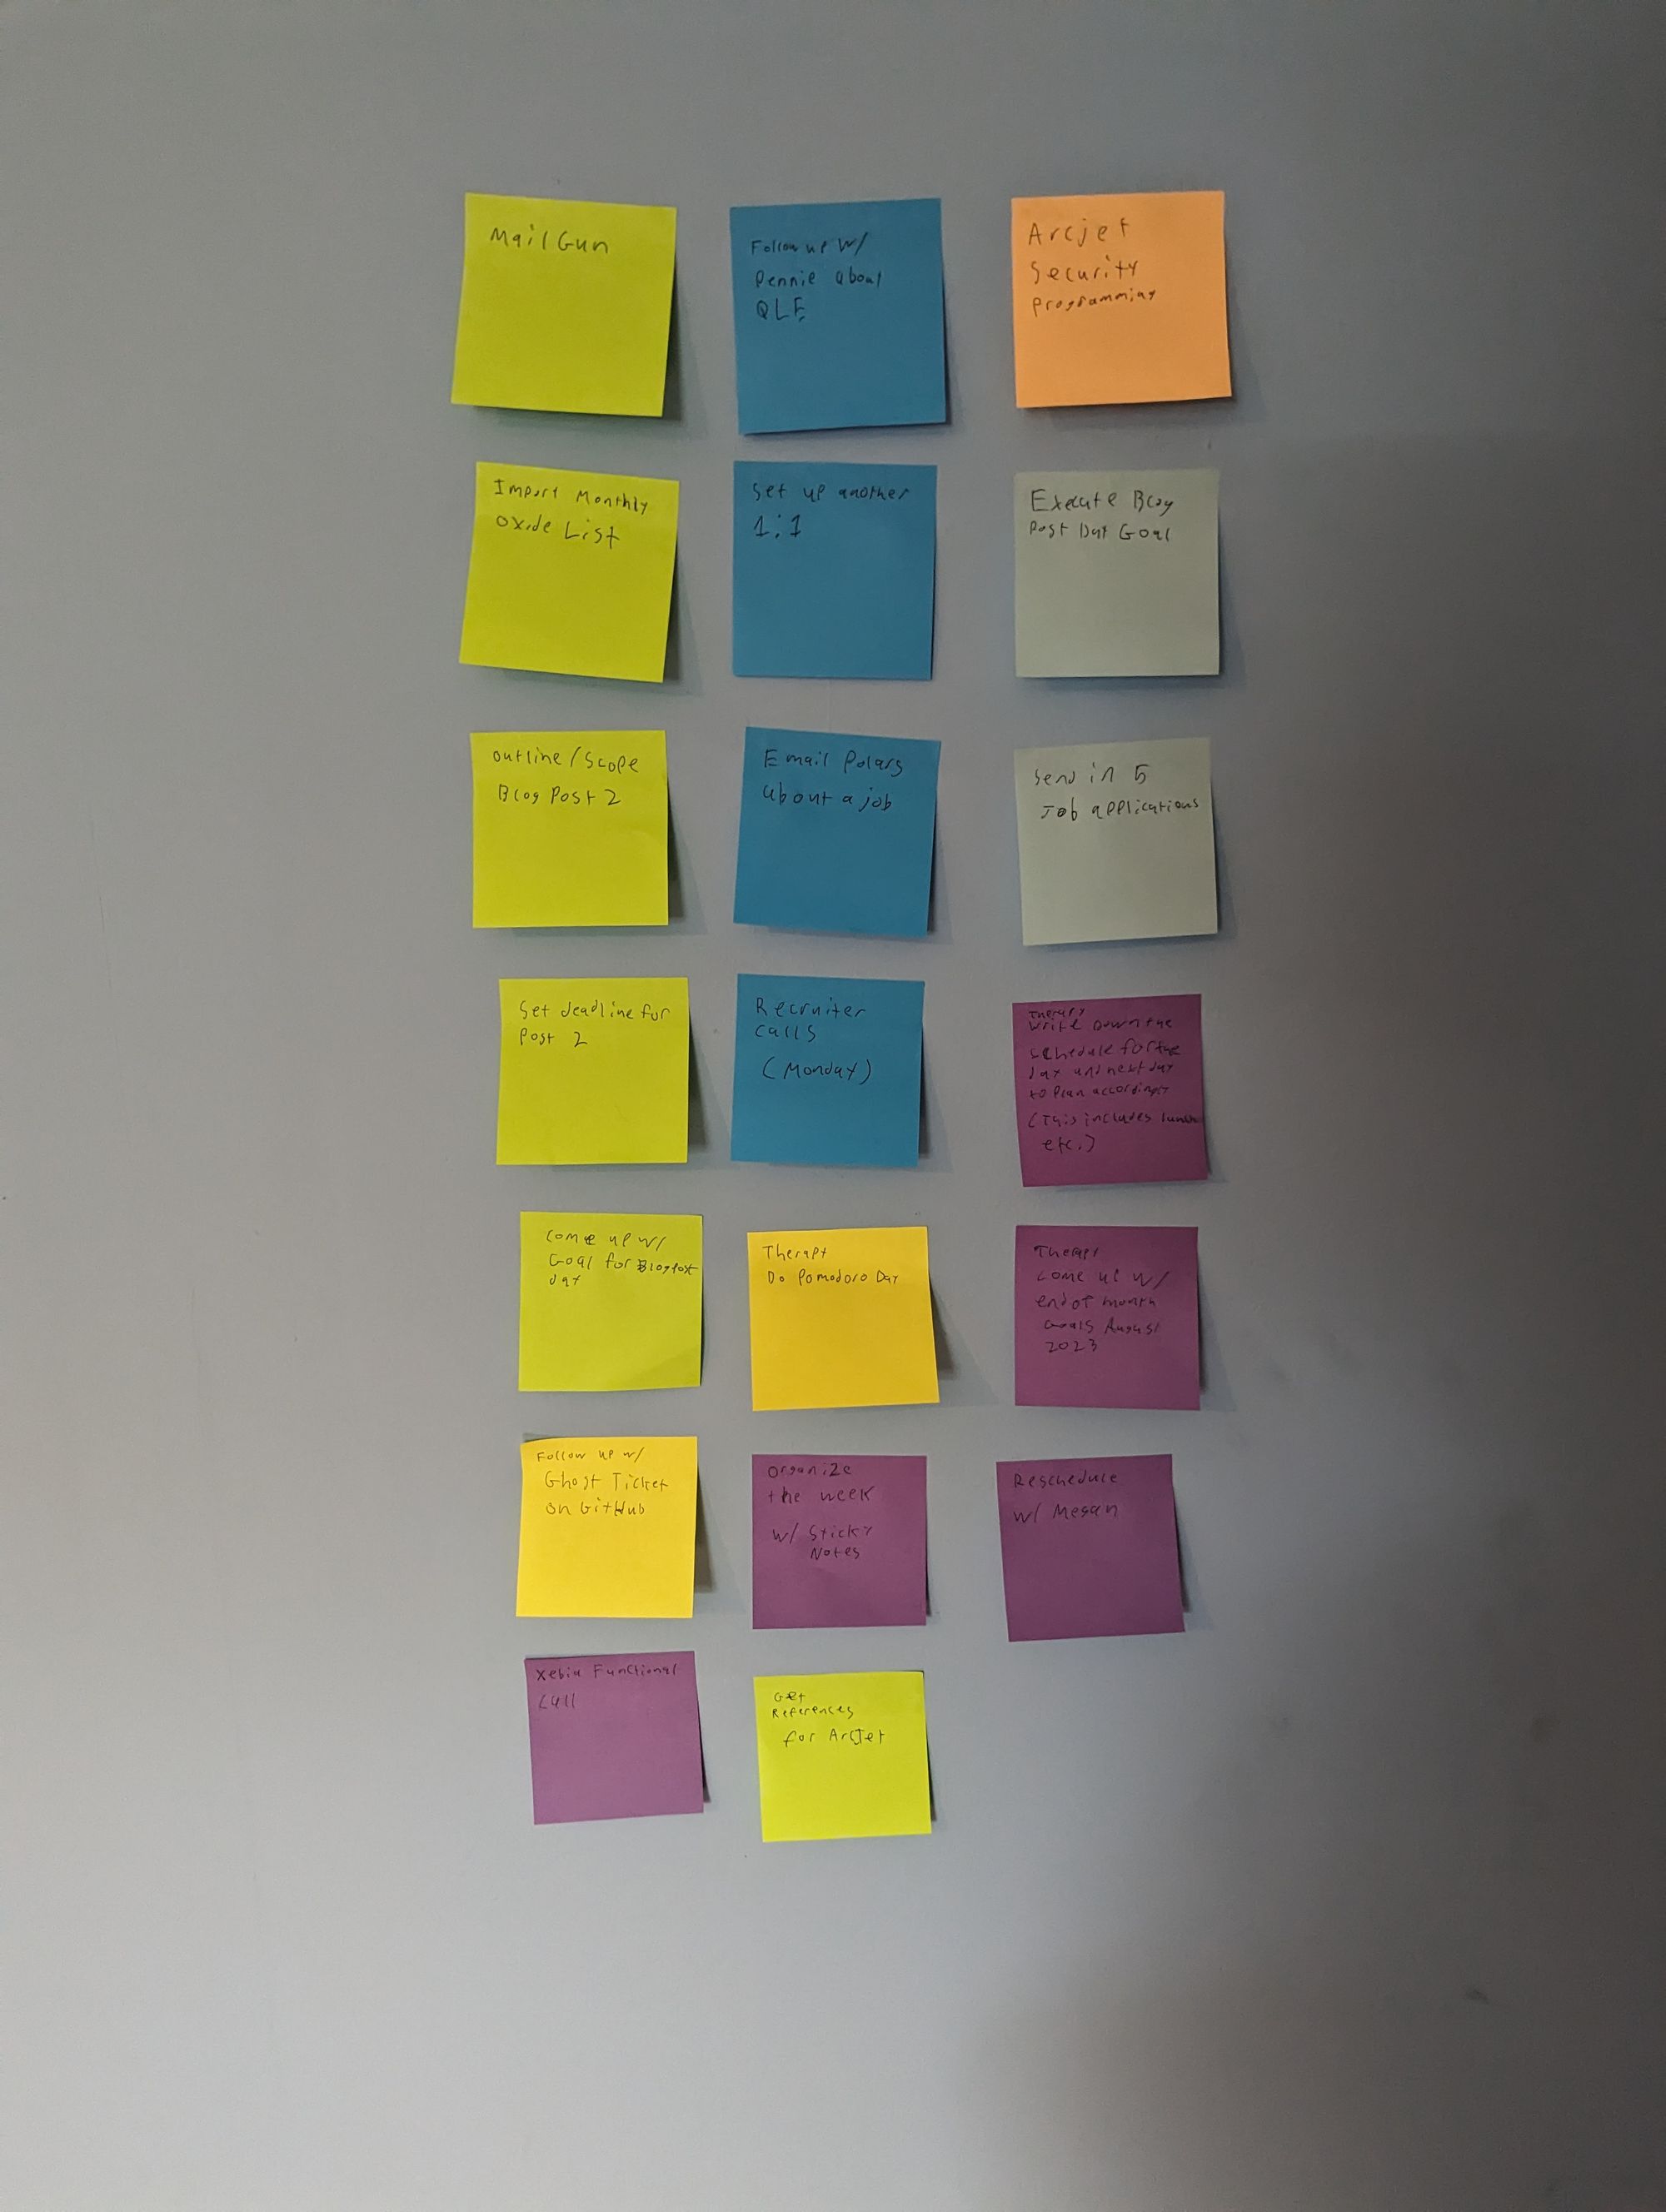 A variety of post it's on the wall that are all completed tasks